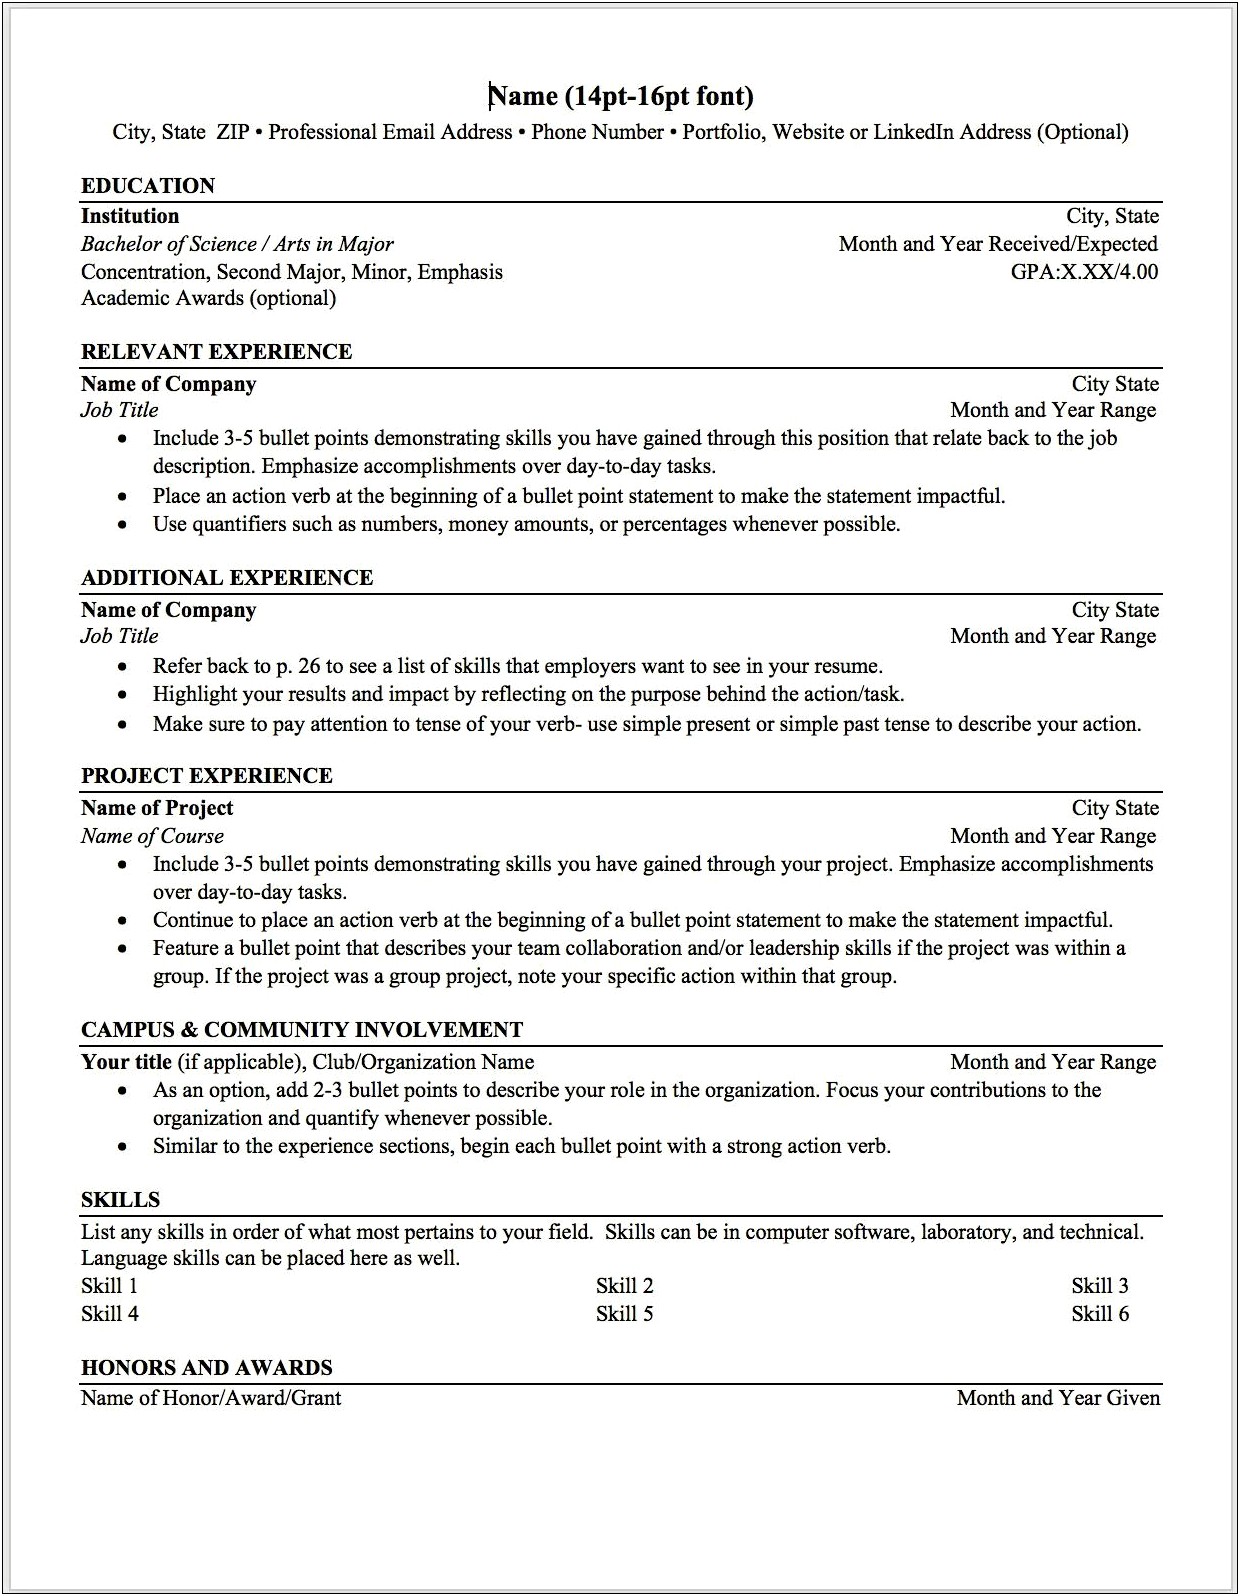 Resume Template For 5 Previous Jobs